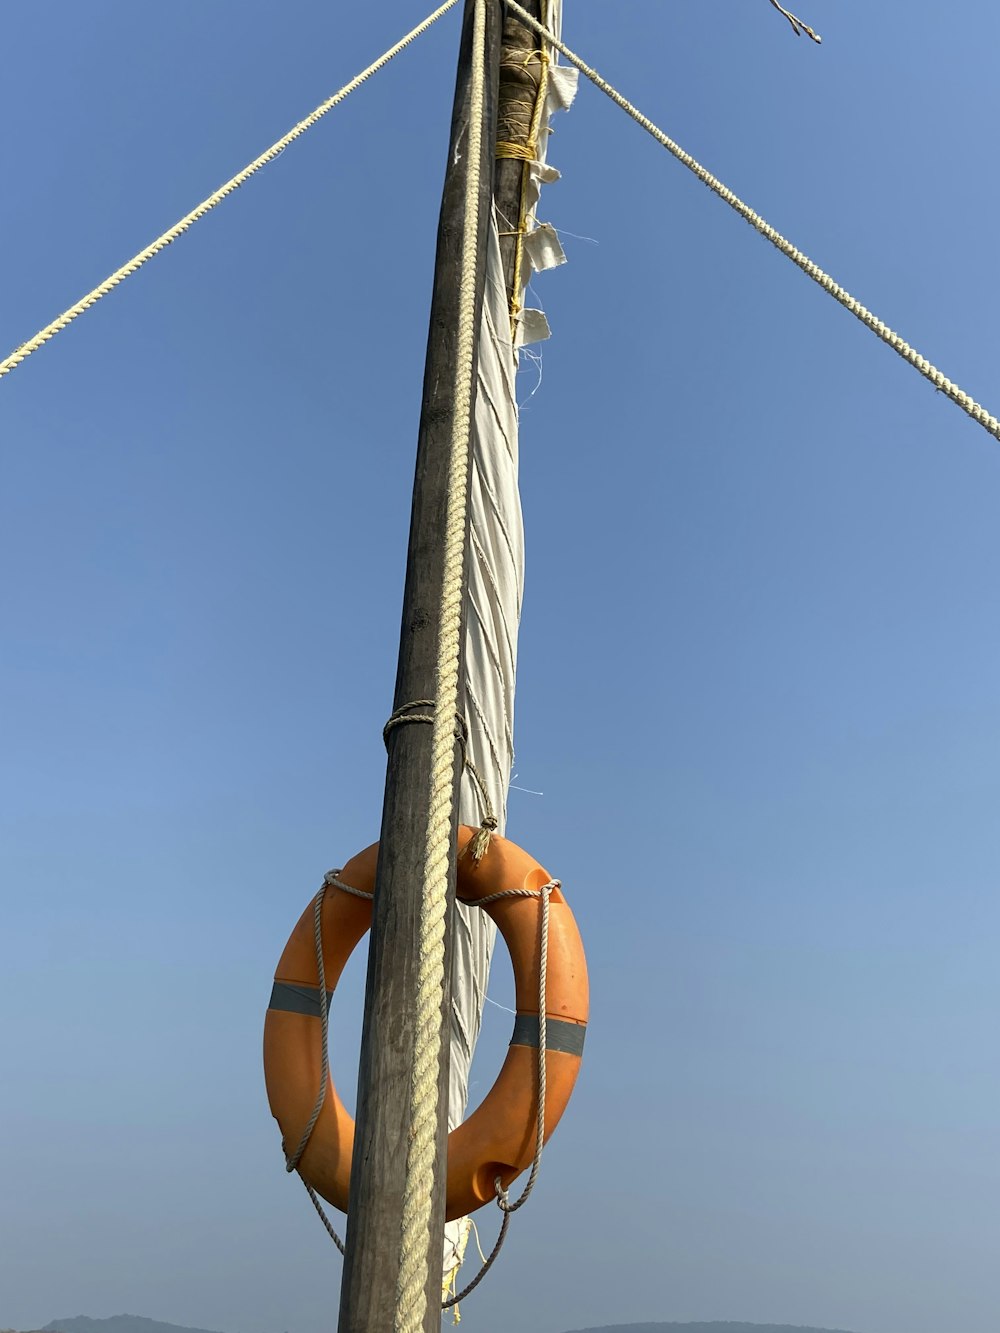 a life preserver hanging on the side of a pole